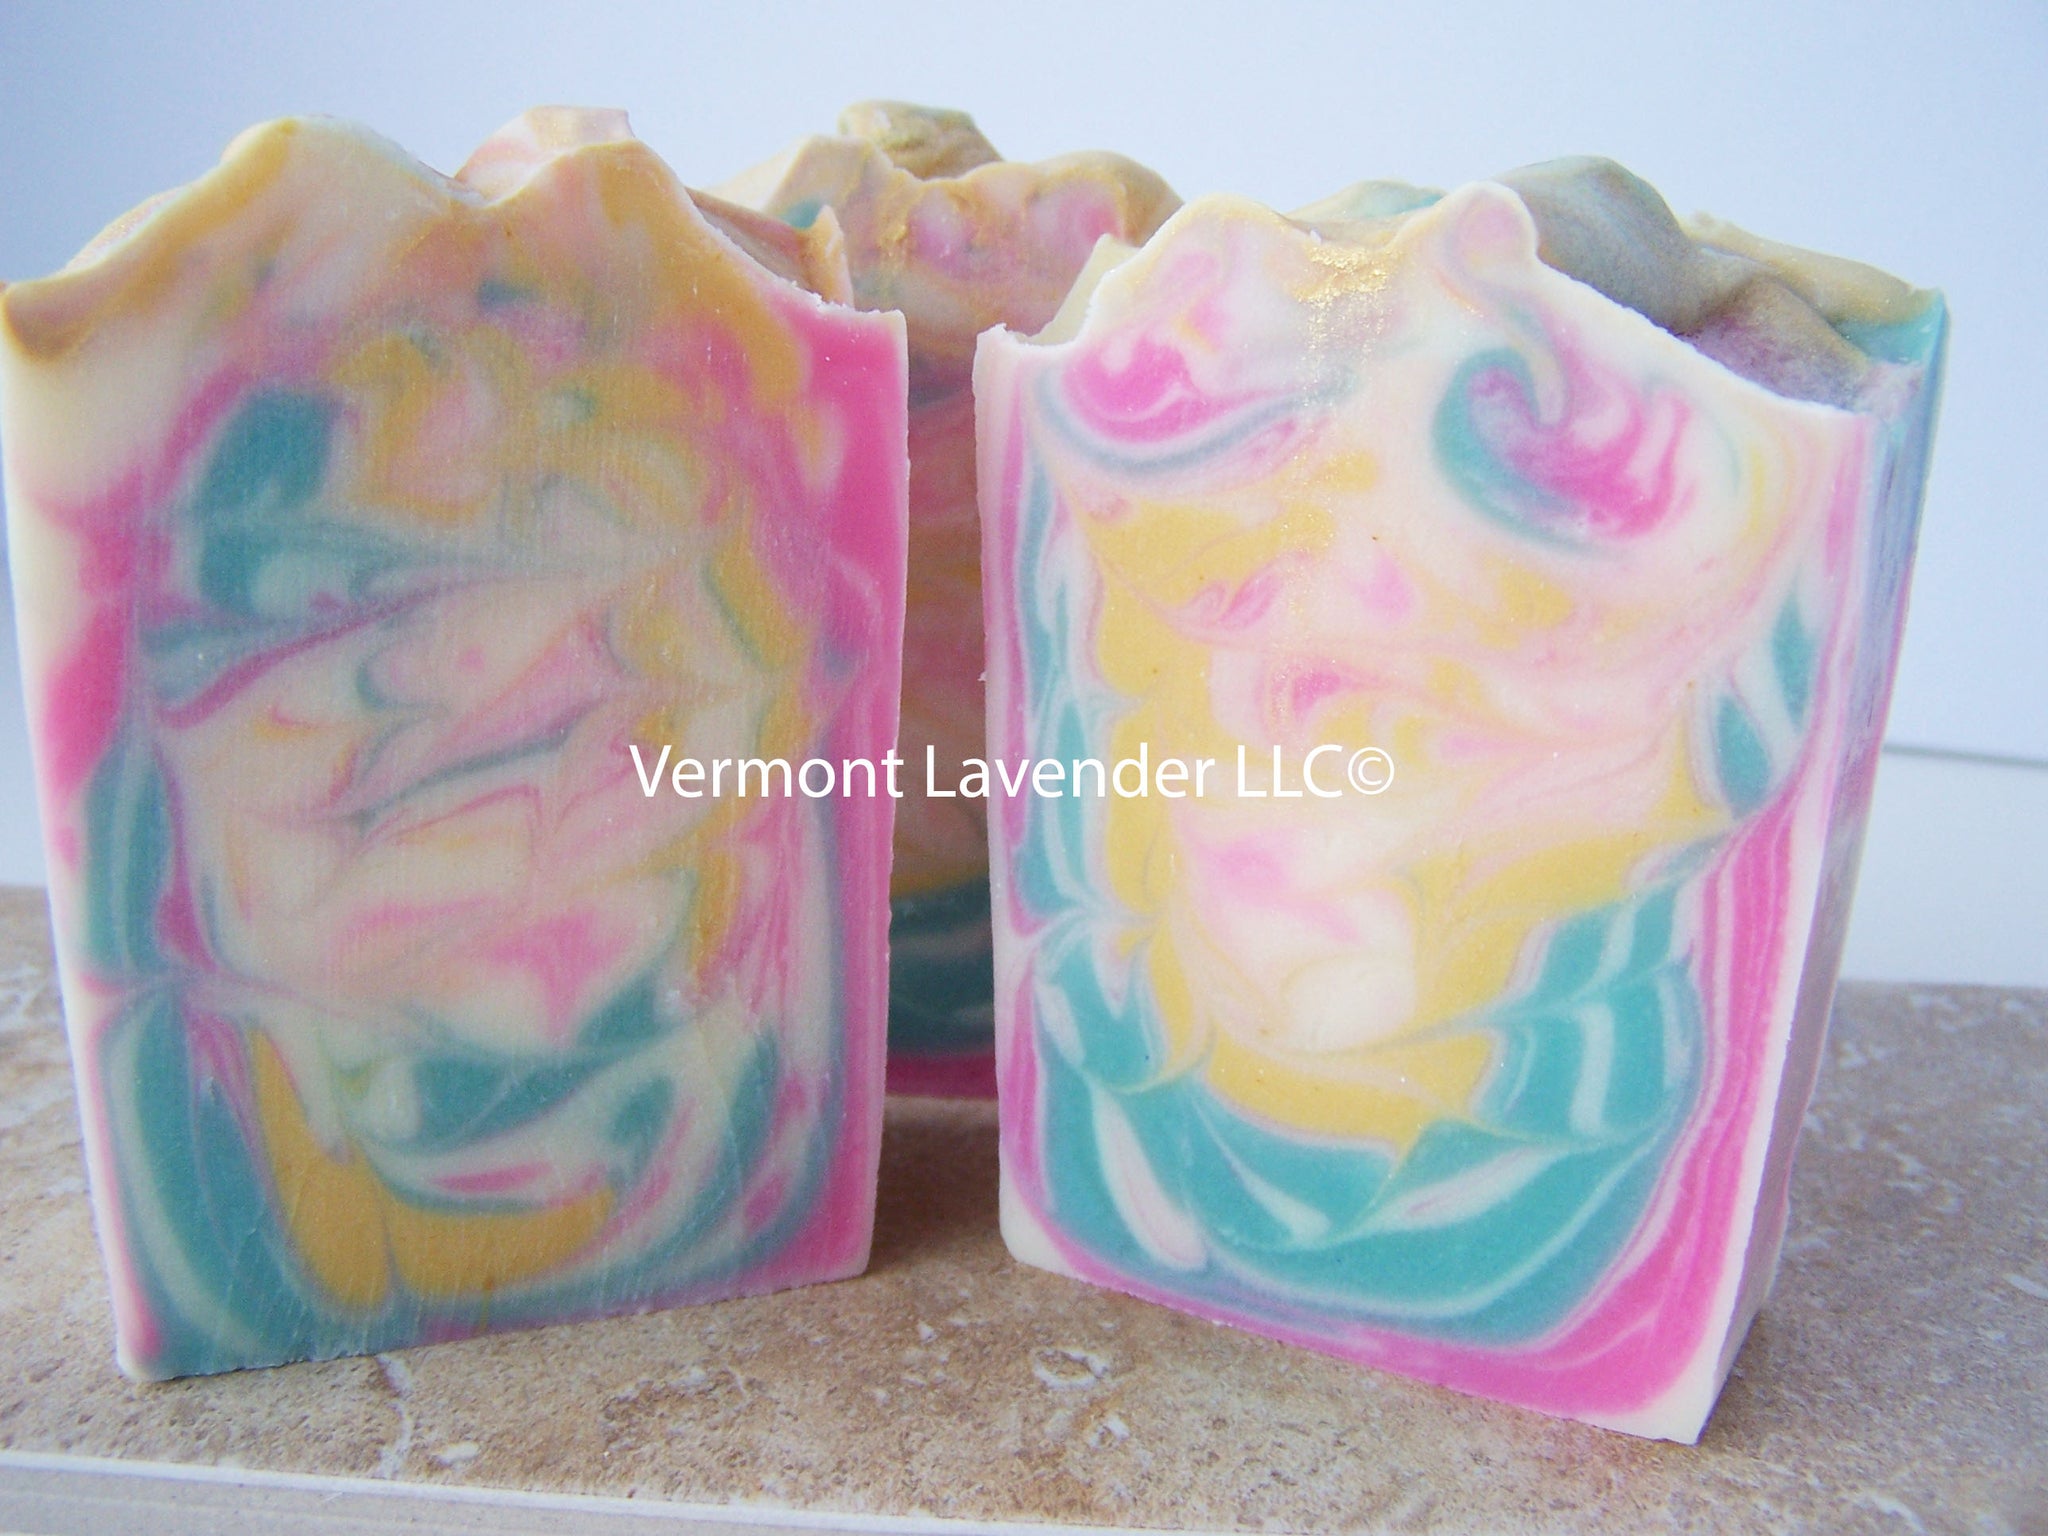 The best soaps for summer smell great for summer days at the beach, barbeques and family camping trips.